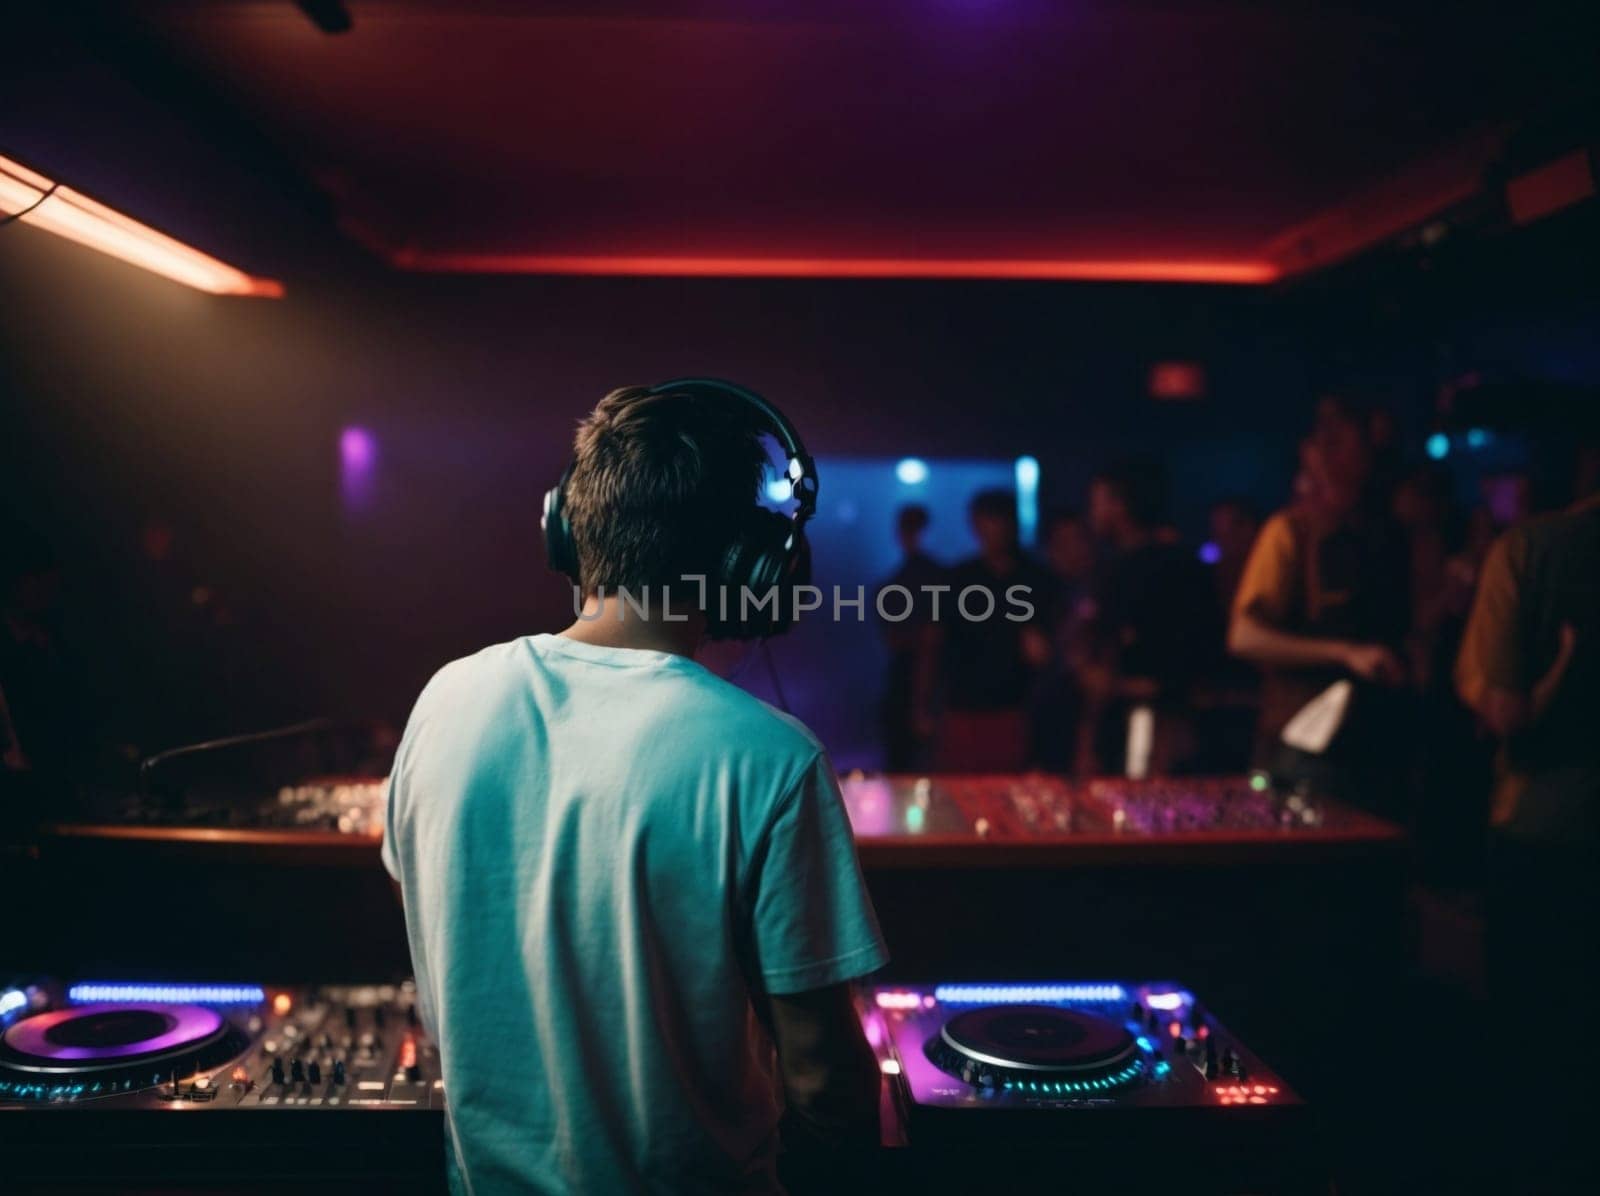 A man in a DJ booth wearing headphones, focused on operating the equipment during a lively music event.